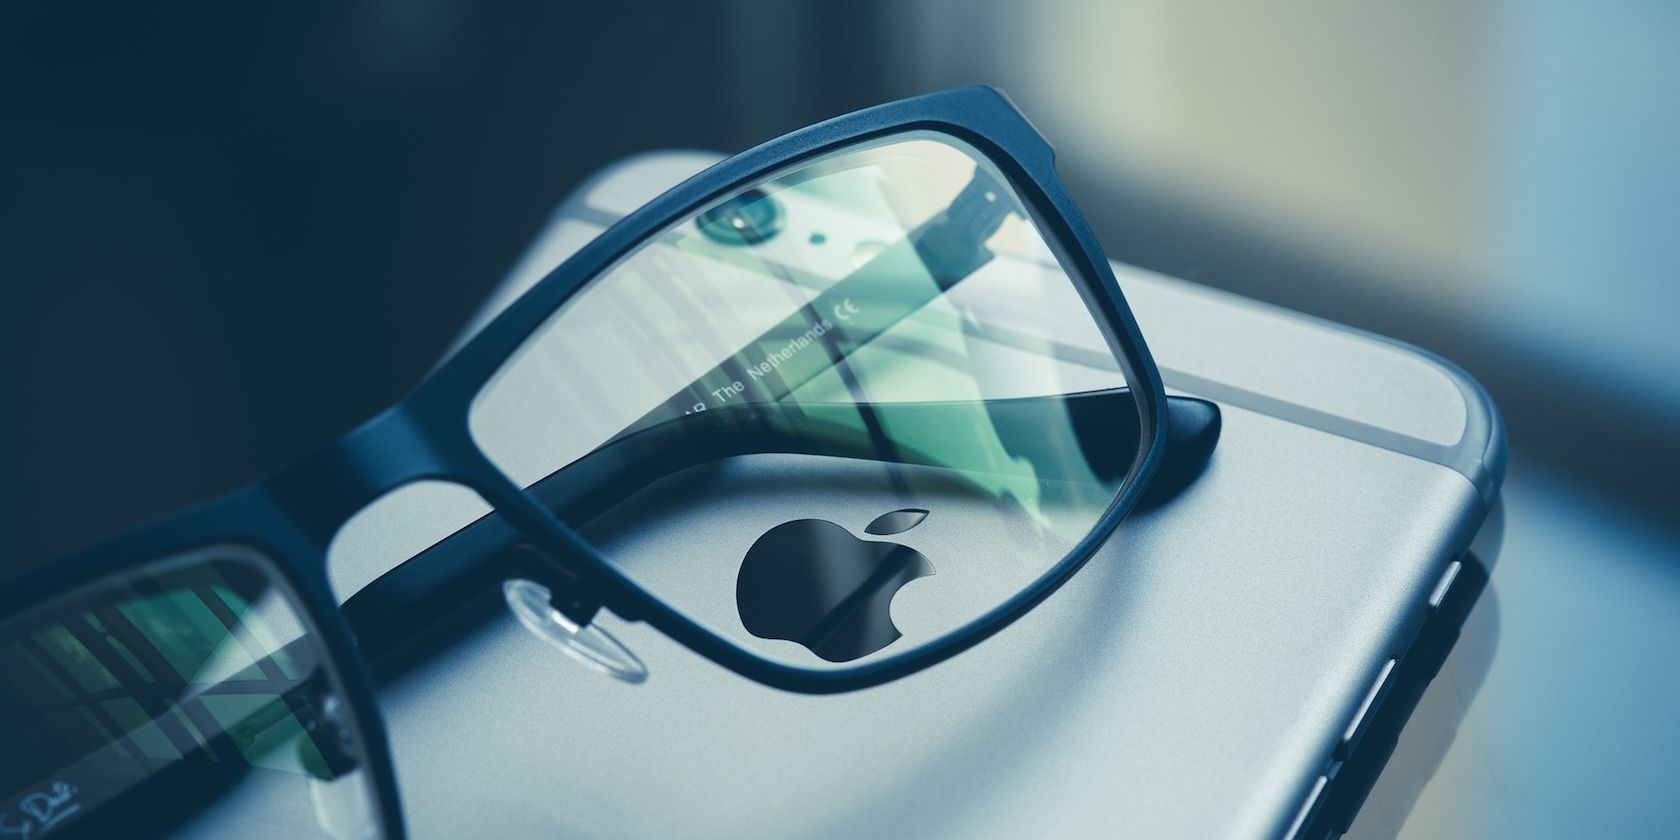 Pair of glasses on an iPhone